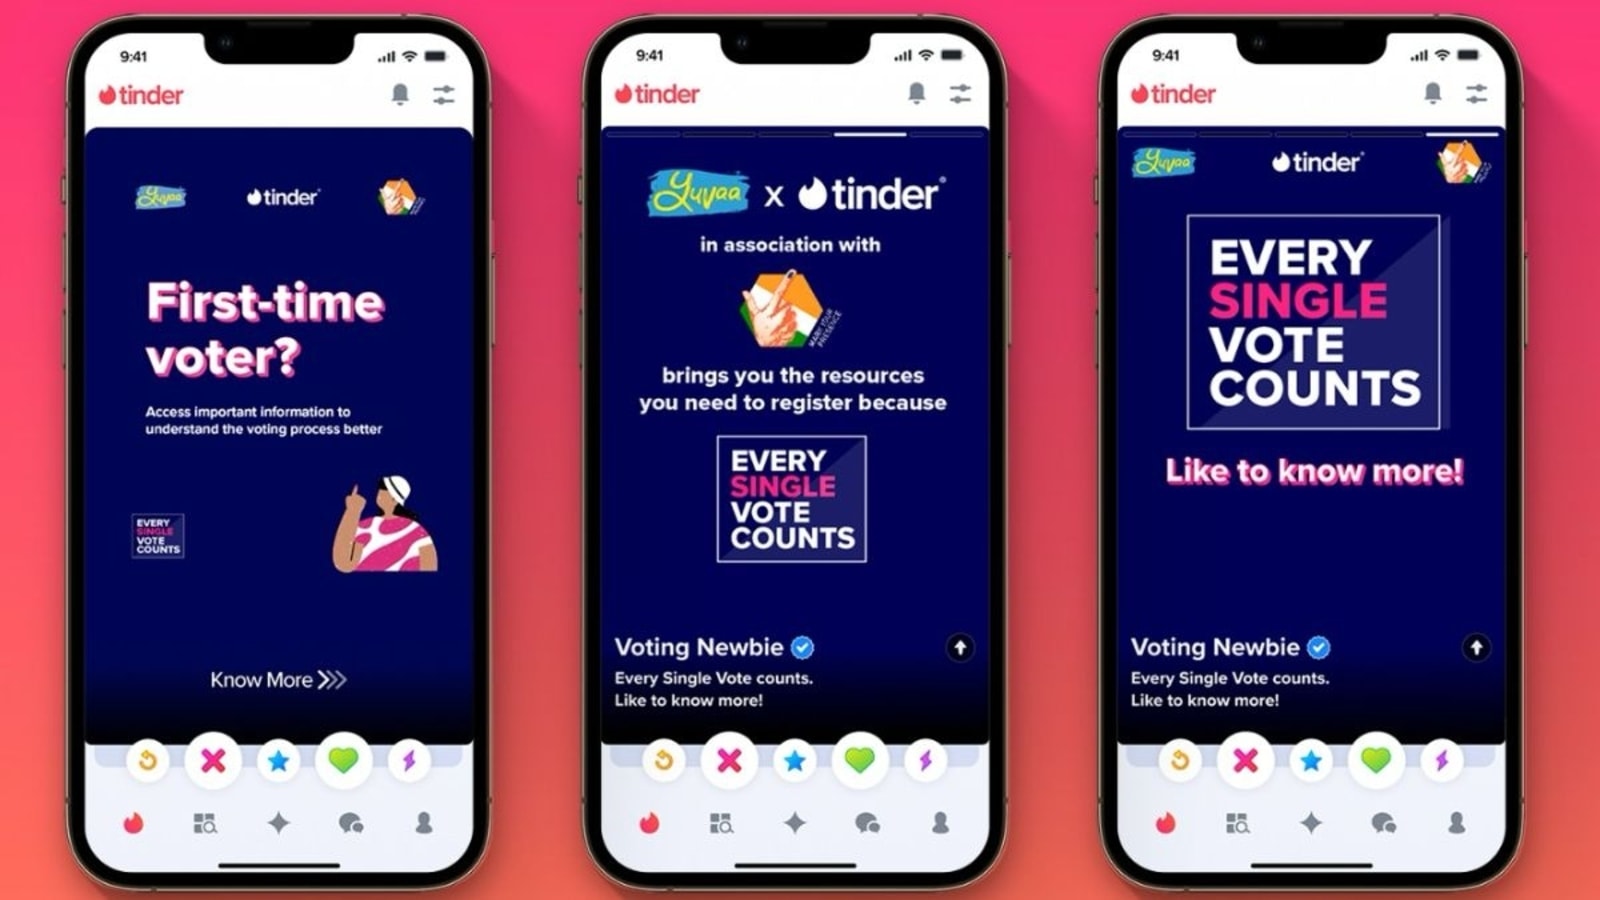 Tinder launches Every Single Vote Counts advertising marketing campaign to empower initially-time voters in India